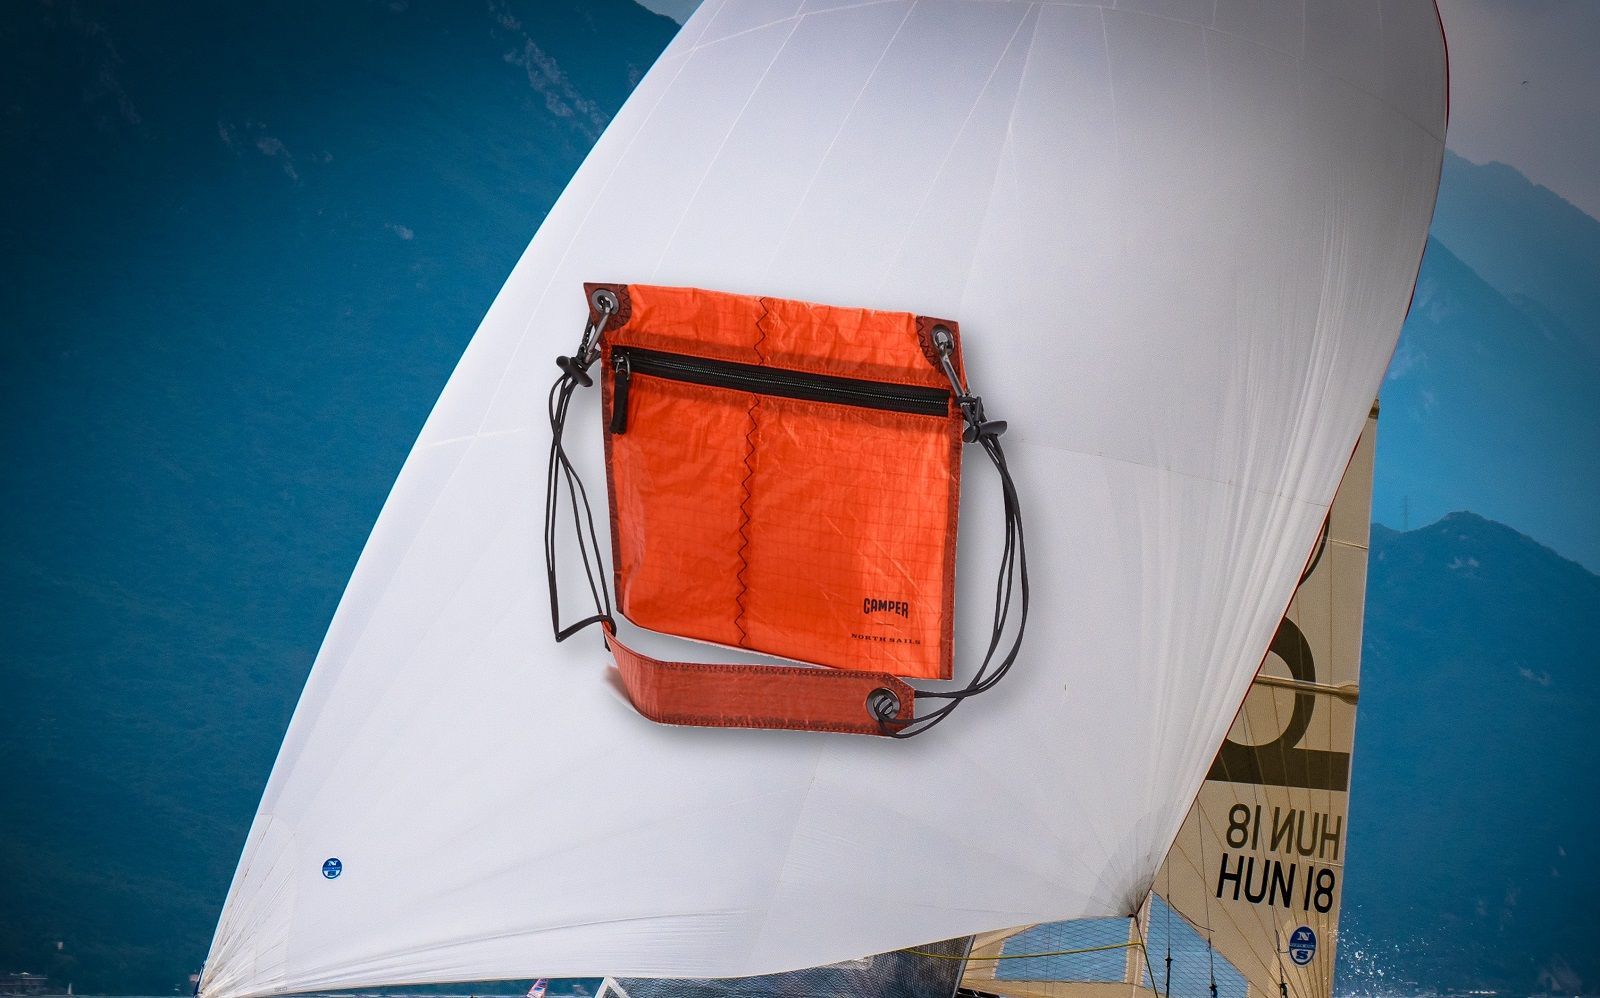 The Camper and North Sails collection with recycled sails